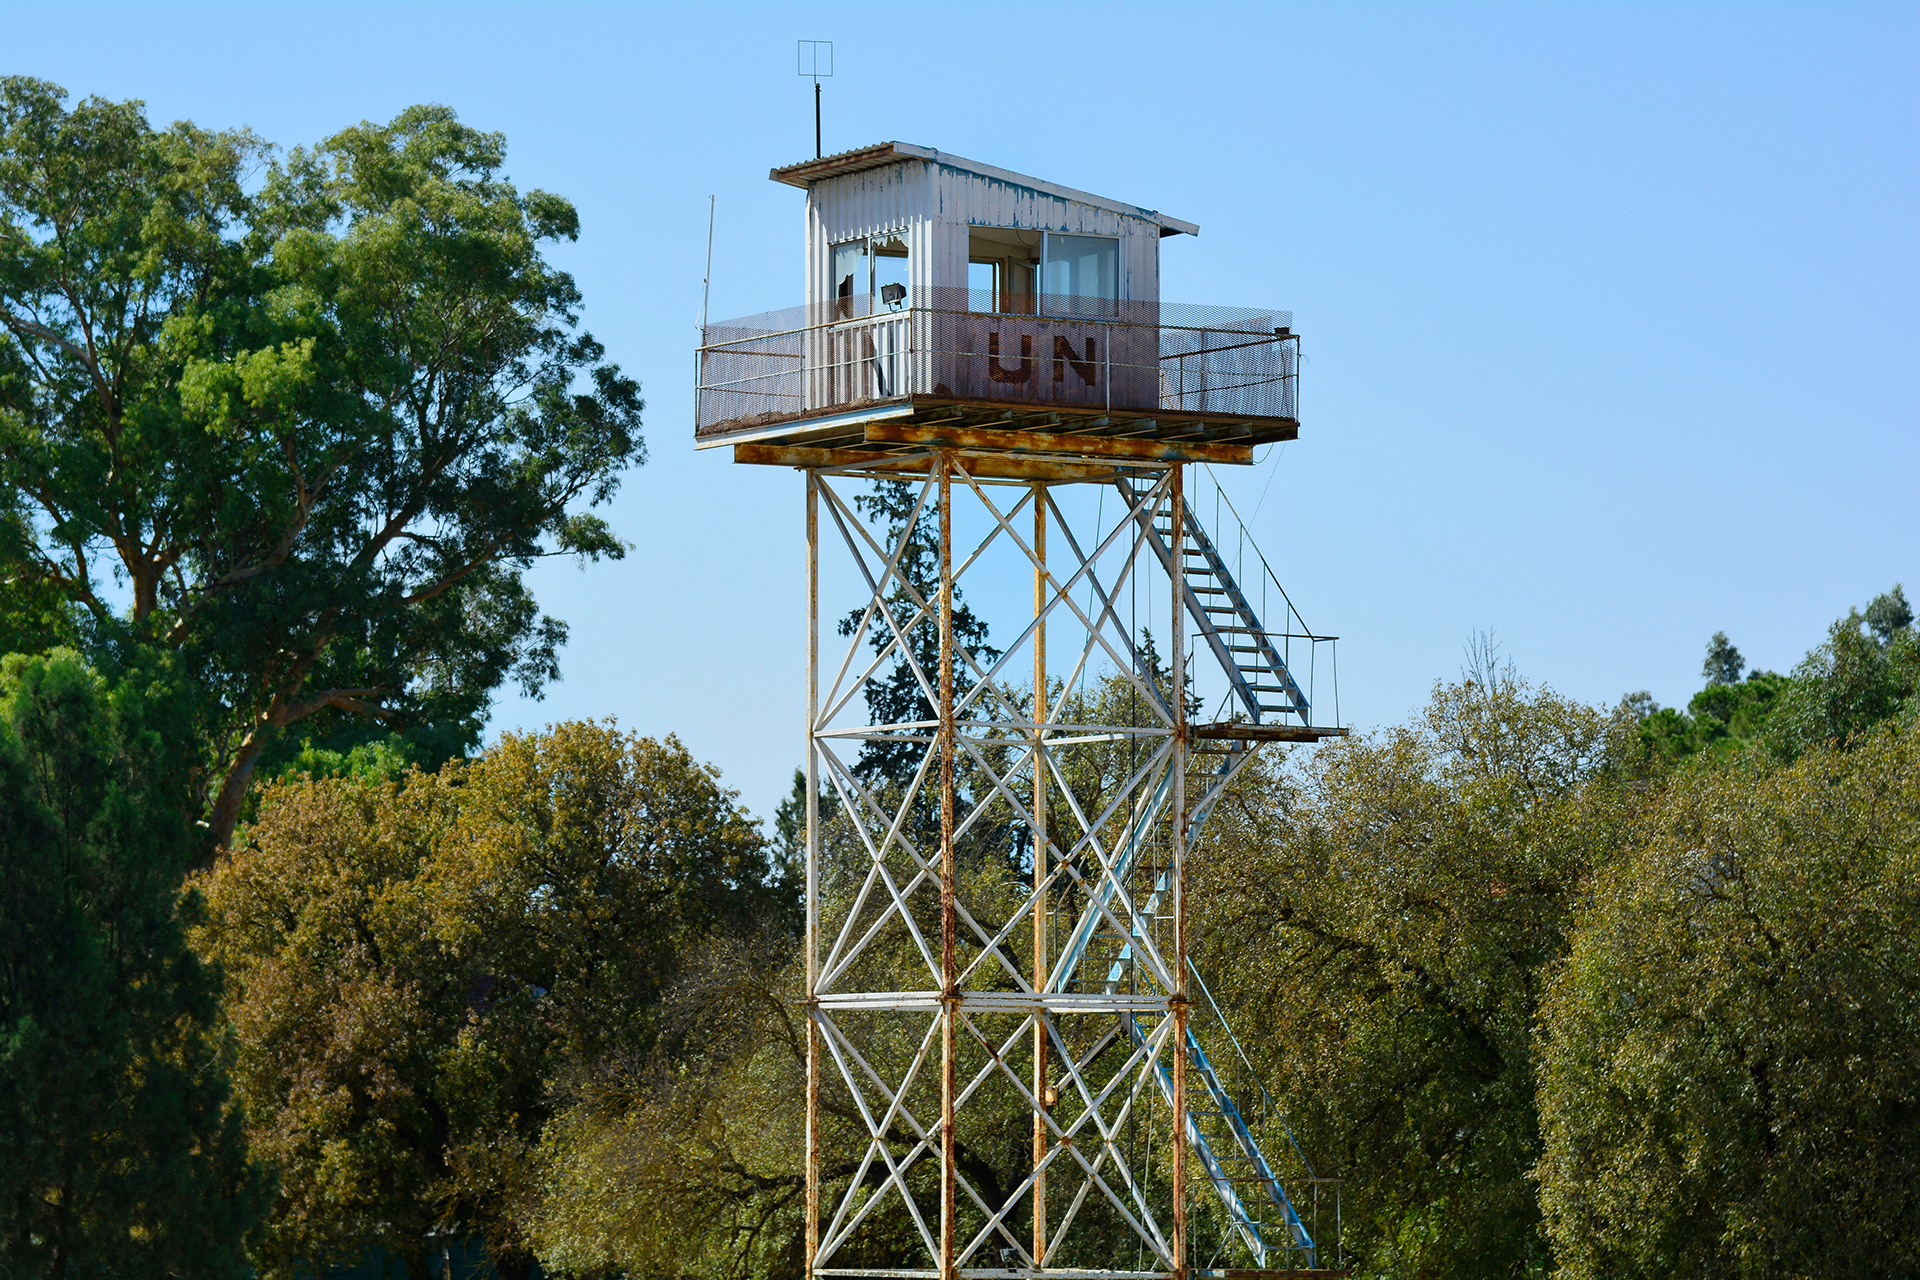 A UN guard tower located in Cyprus